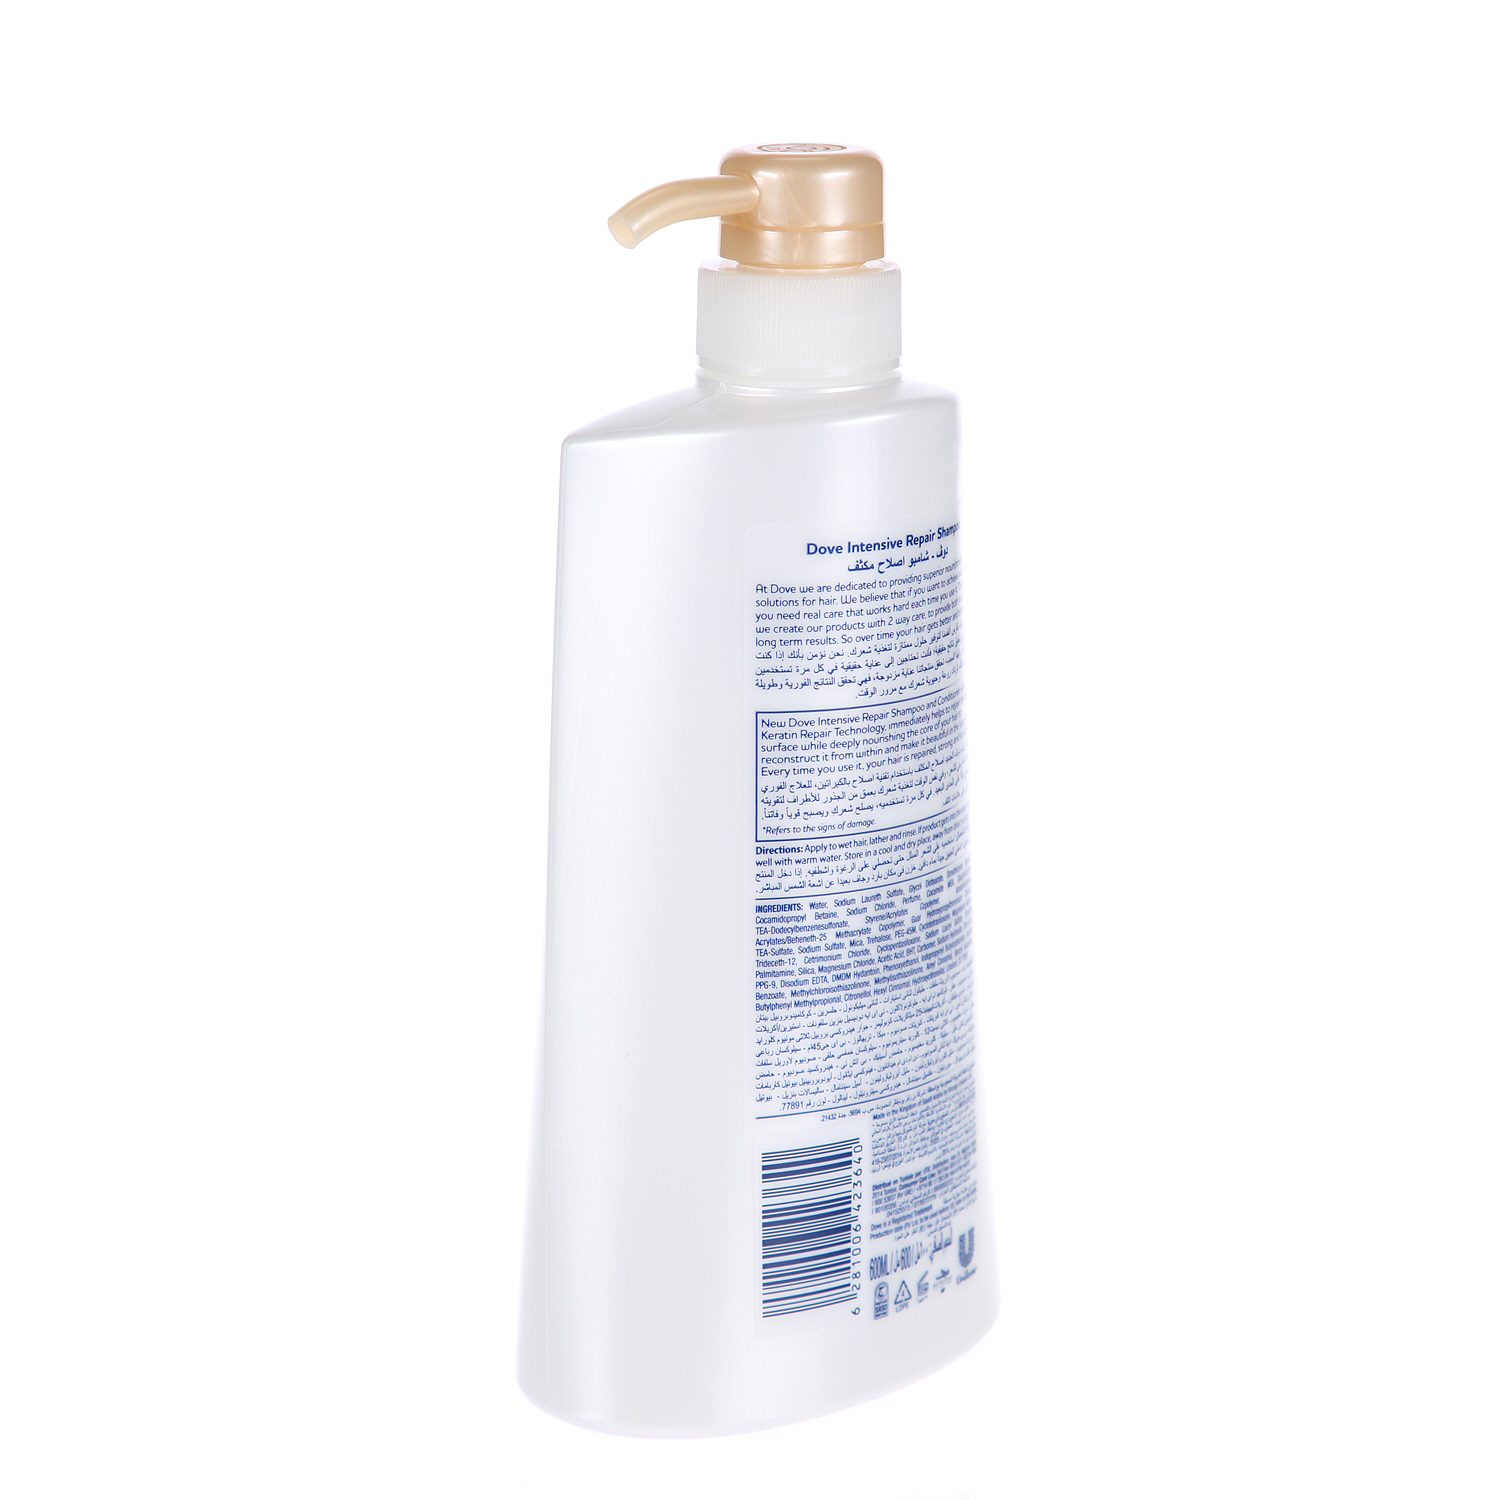 Dove Shampoo for Damaged Hair Intensive Repair Nourishing Care for up to 100% Healthy Looking Hair 600 ml